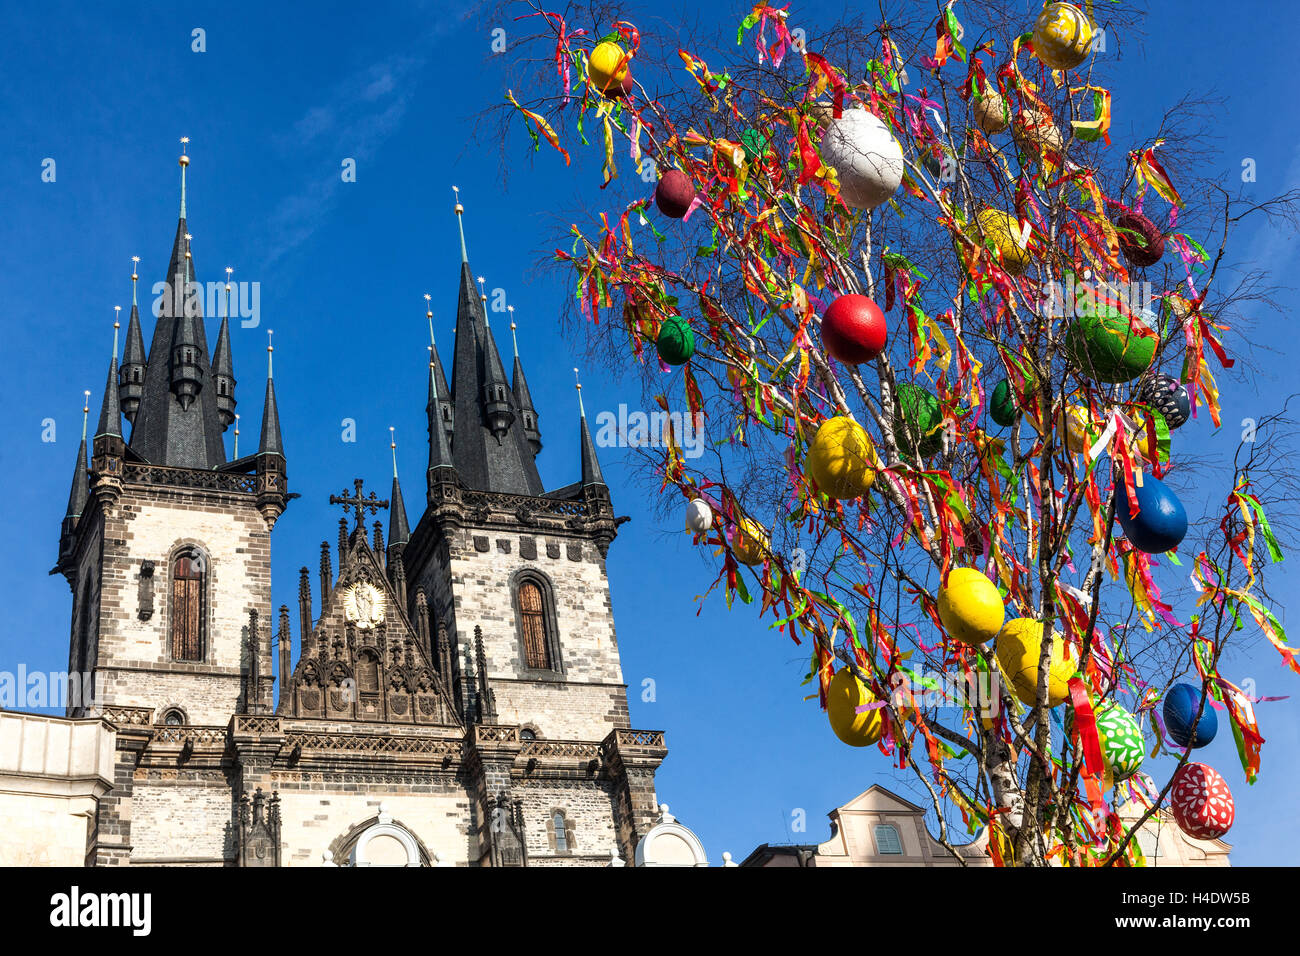 Prague Easter Tree Prague Spring Hanging Eggs on Branches Prague Old Town Square Prague Czech Republic Europe Easter Traditional Decoration Outside Stock Photo